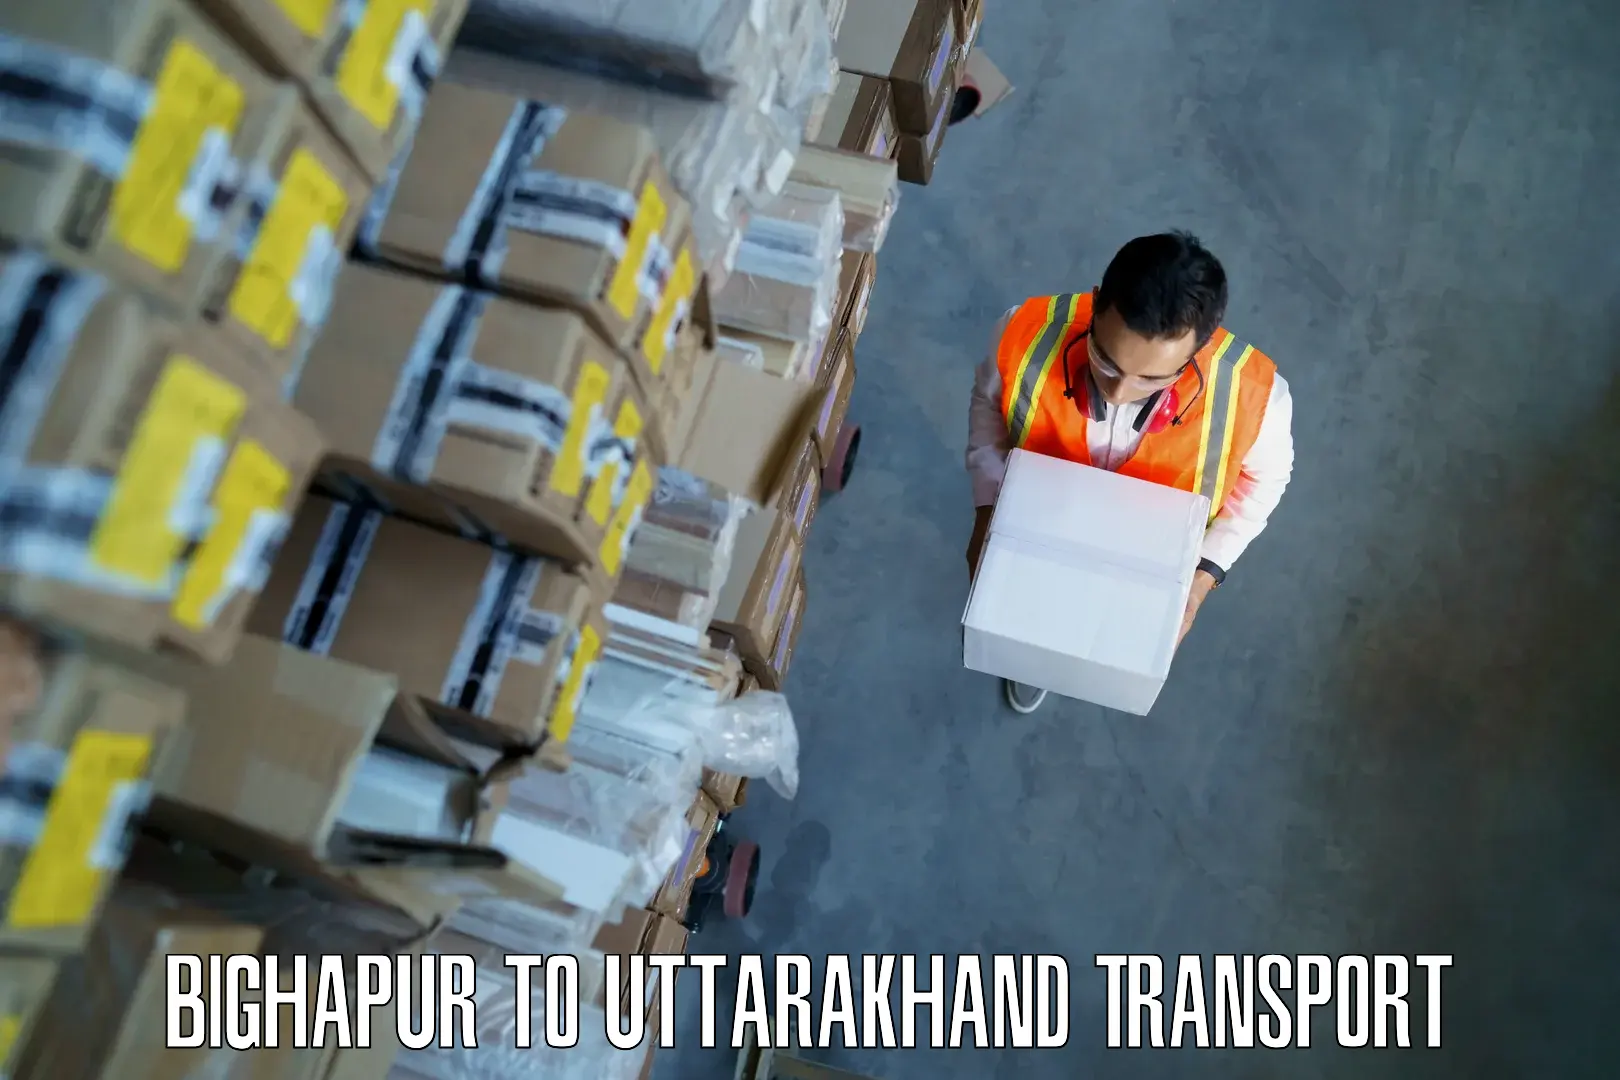 Delivery service Bighapur to Uttarakhand